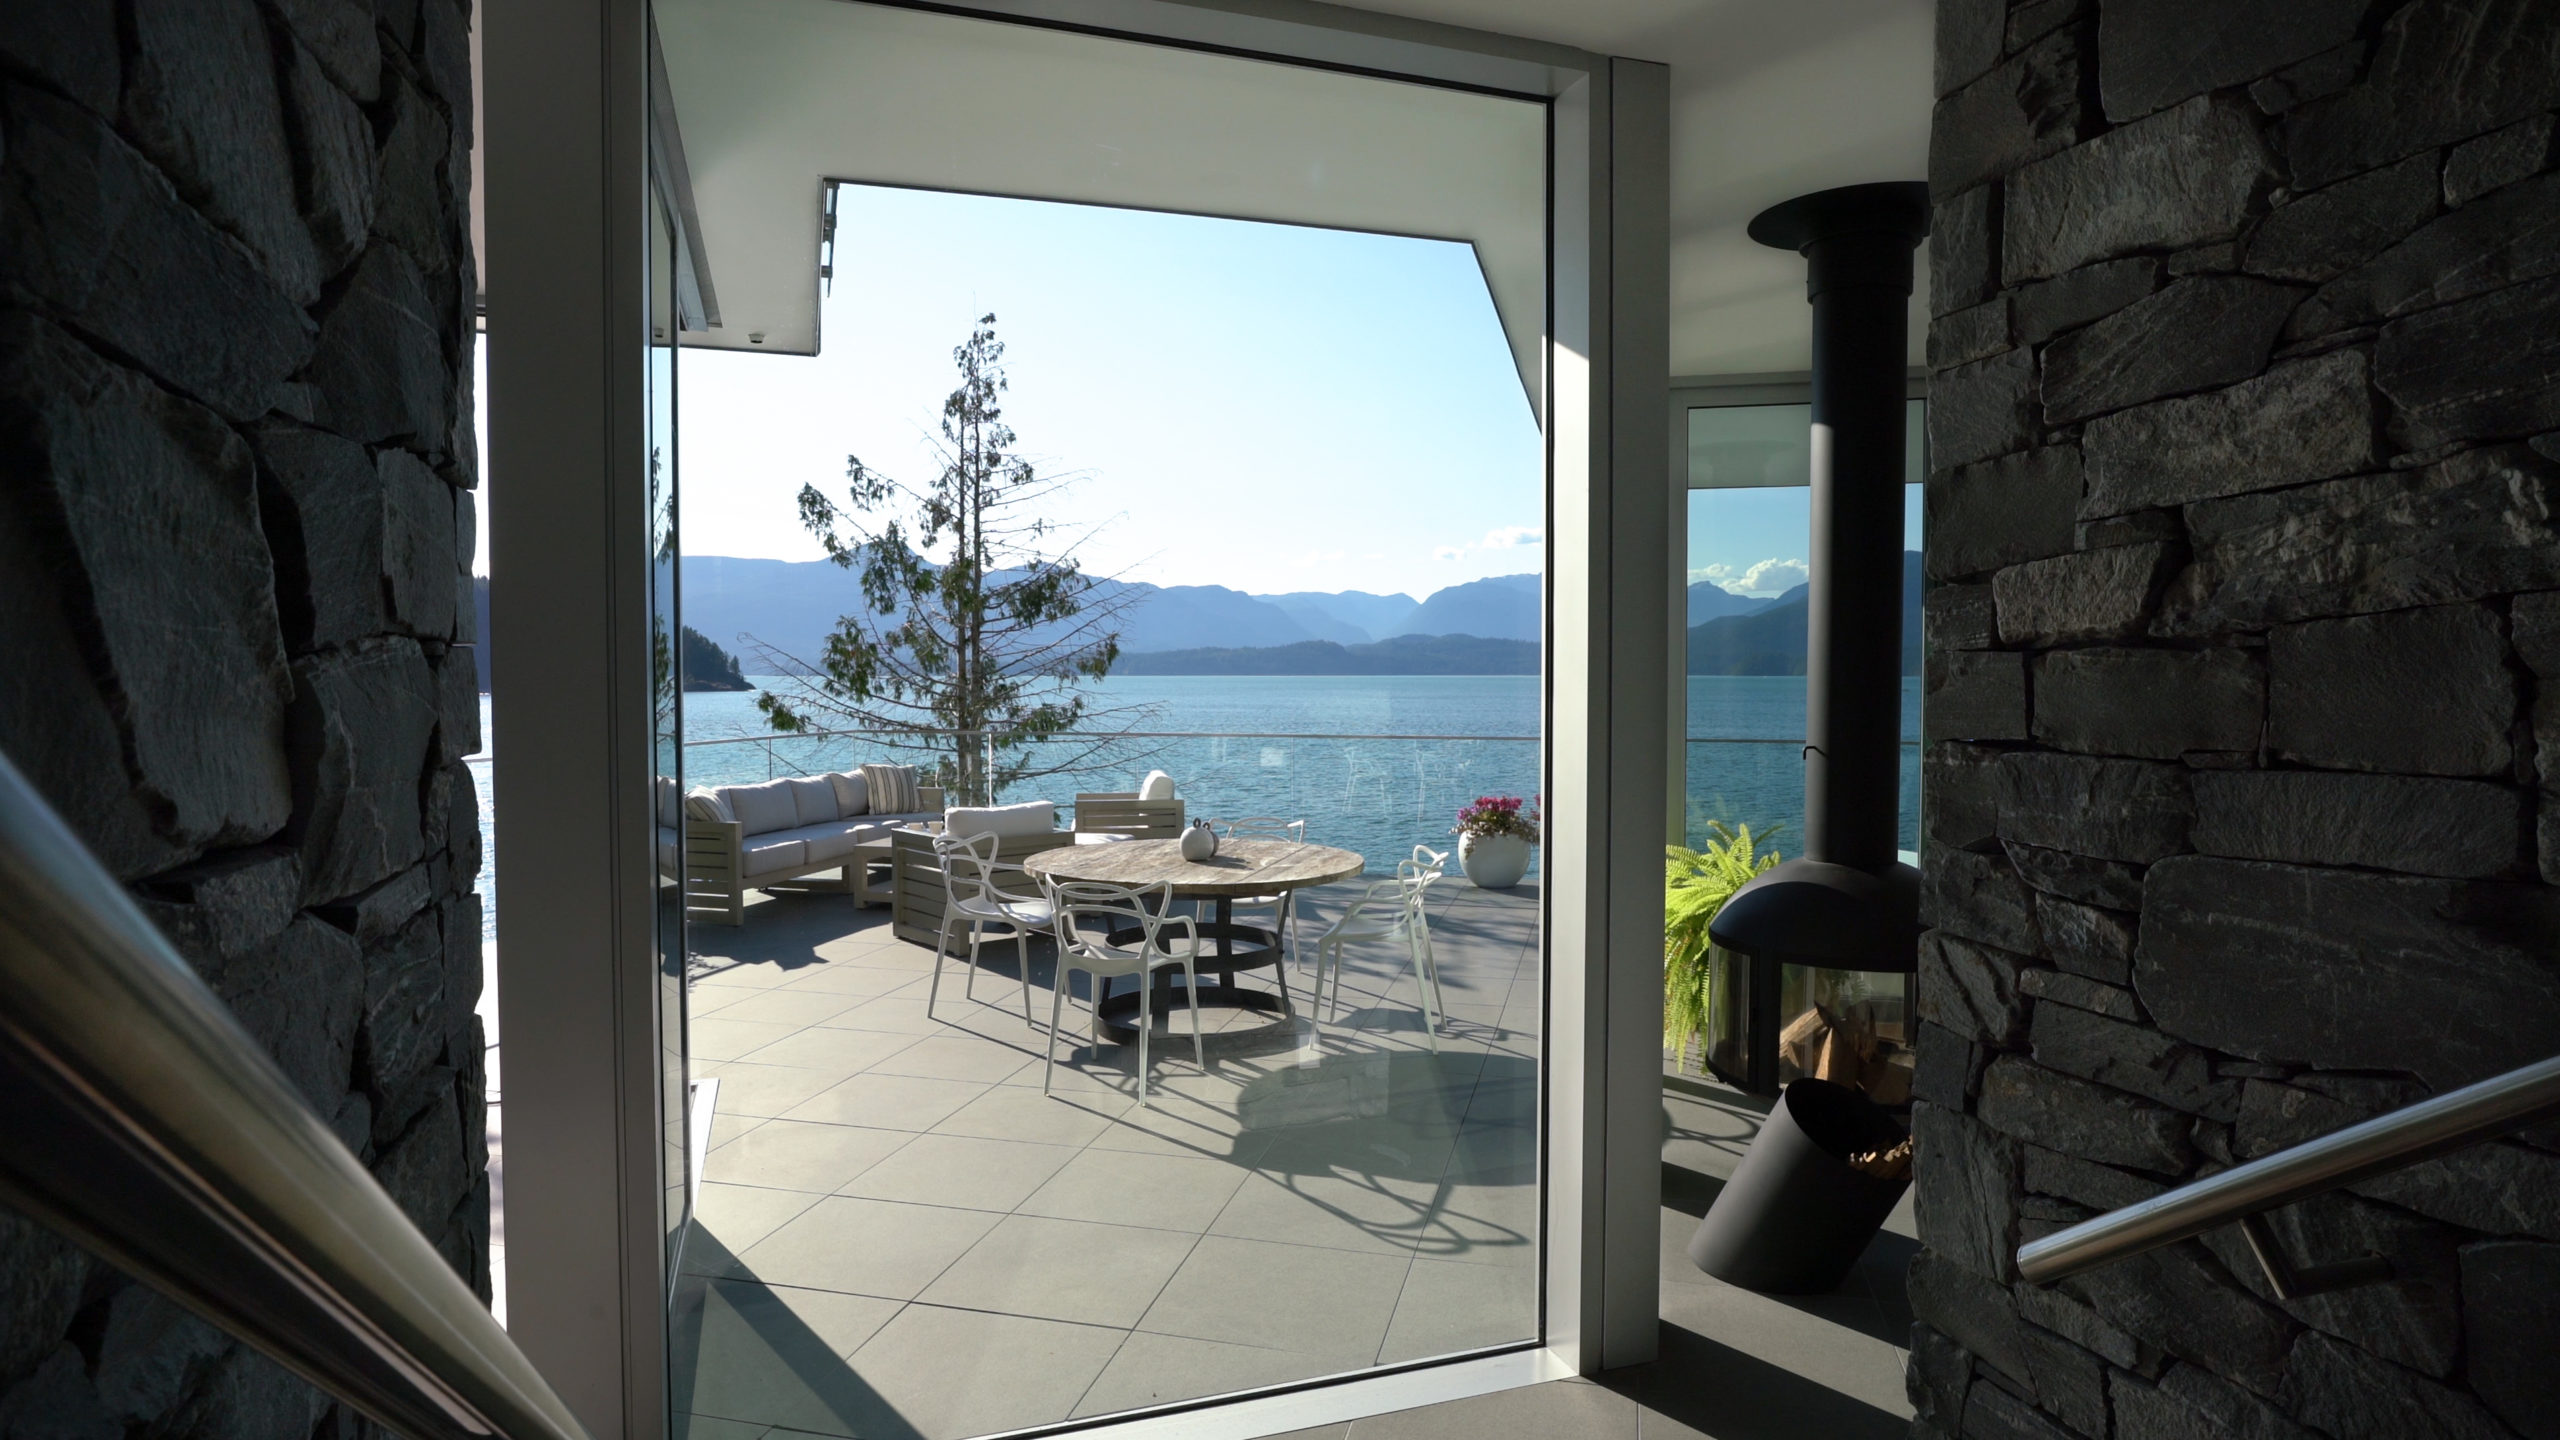 Backyard design with ocean view in a luxurious custom residence on Bowen Island.